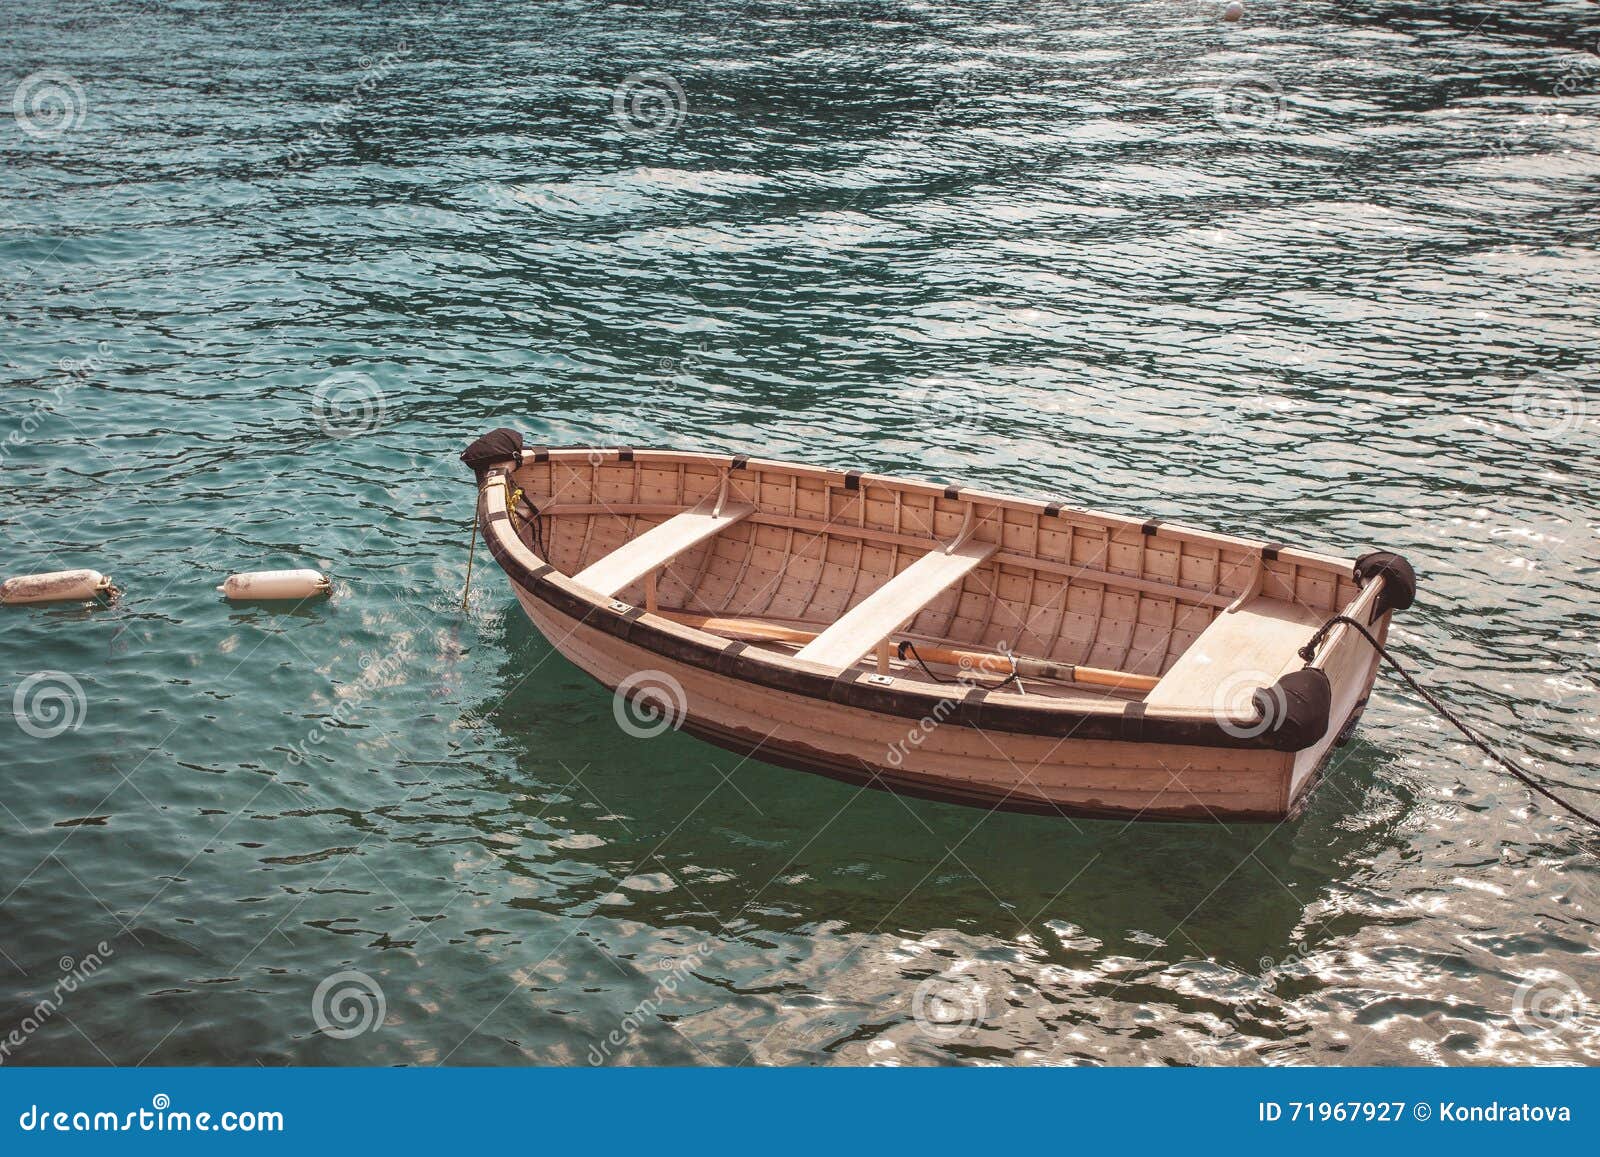 Old Wooden Fishing Boat in Turquoise Water. Stock Image - Image of  landscape, edge: 71967927